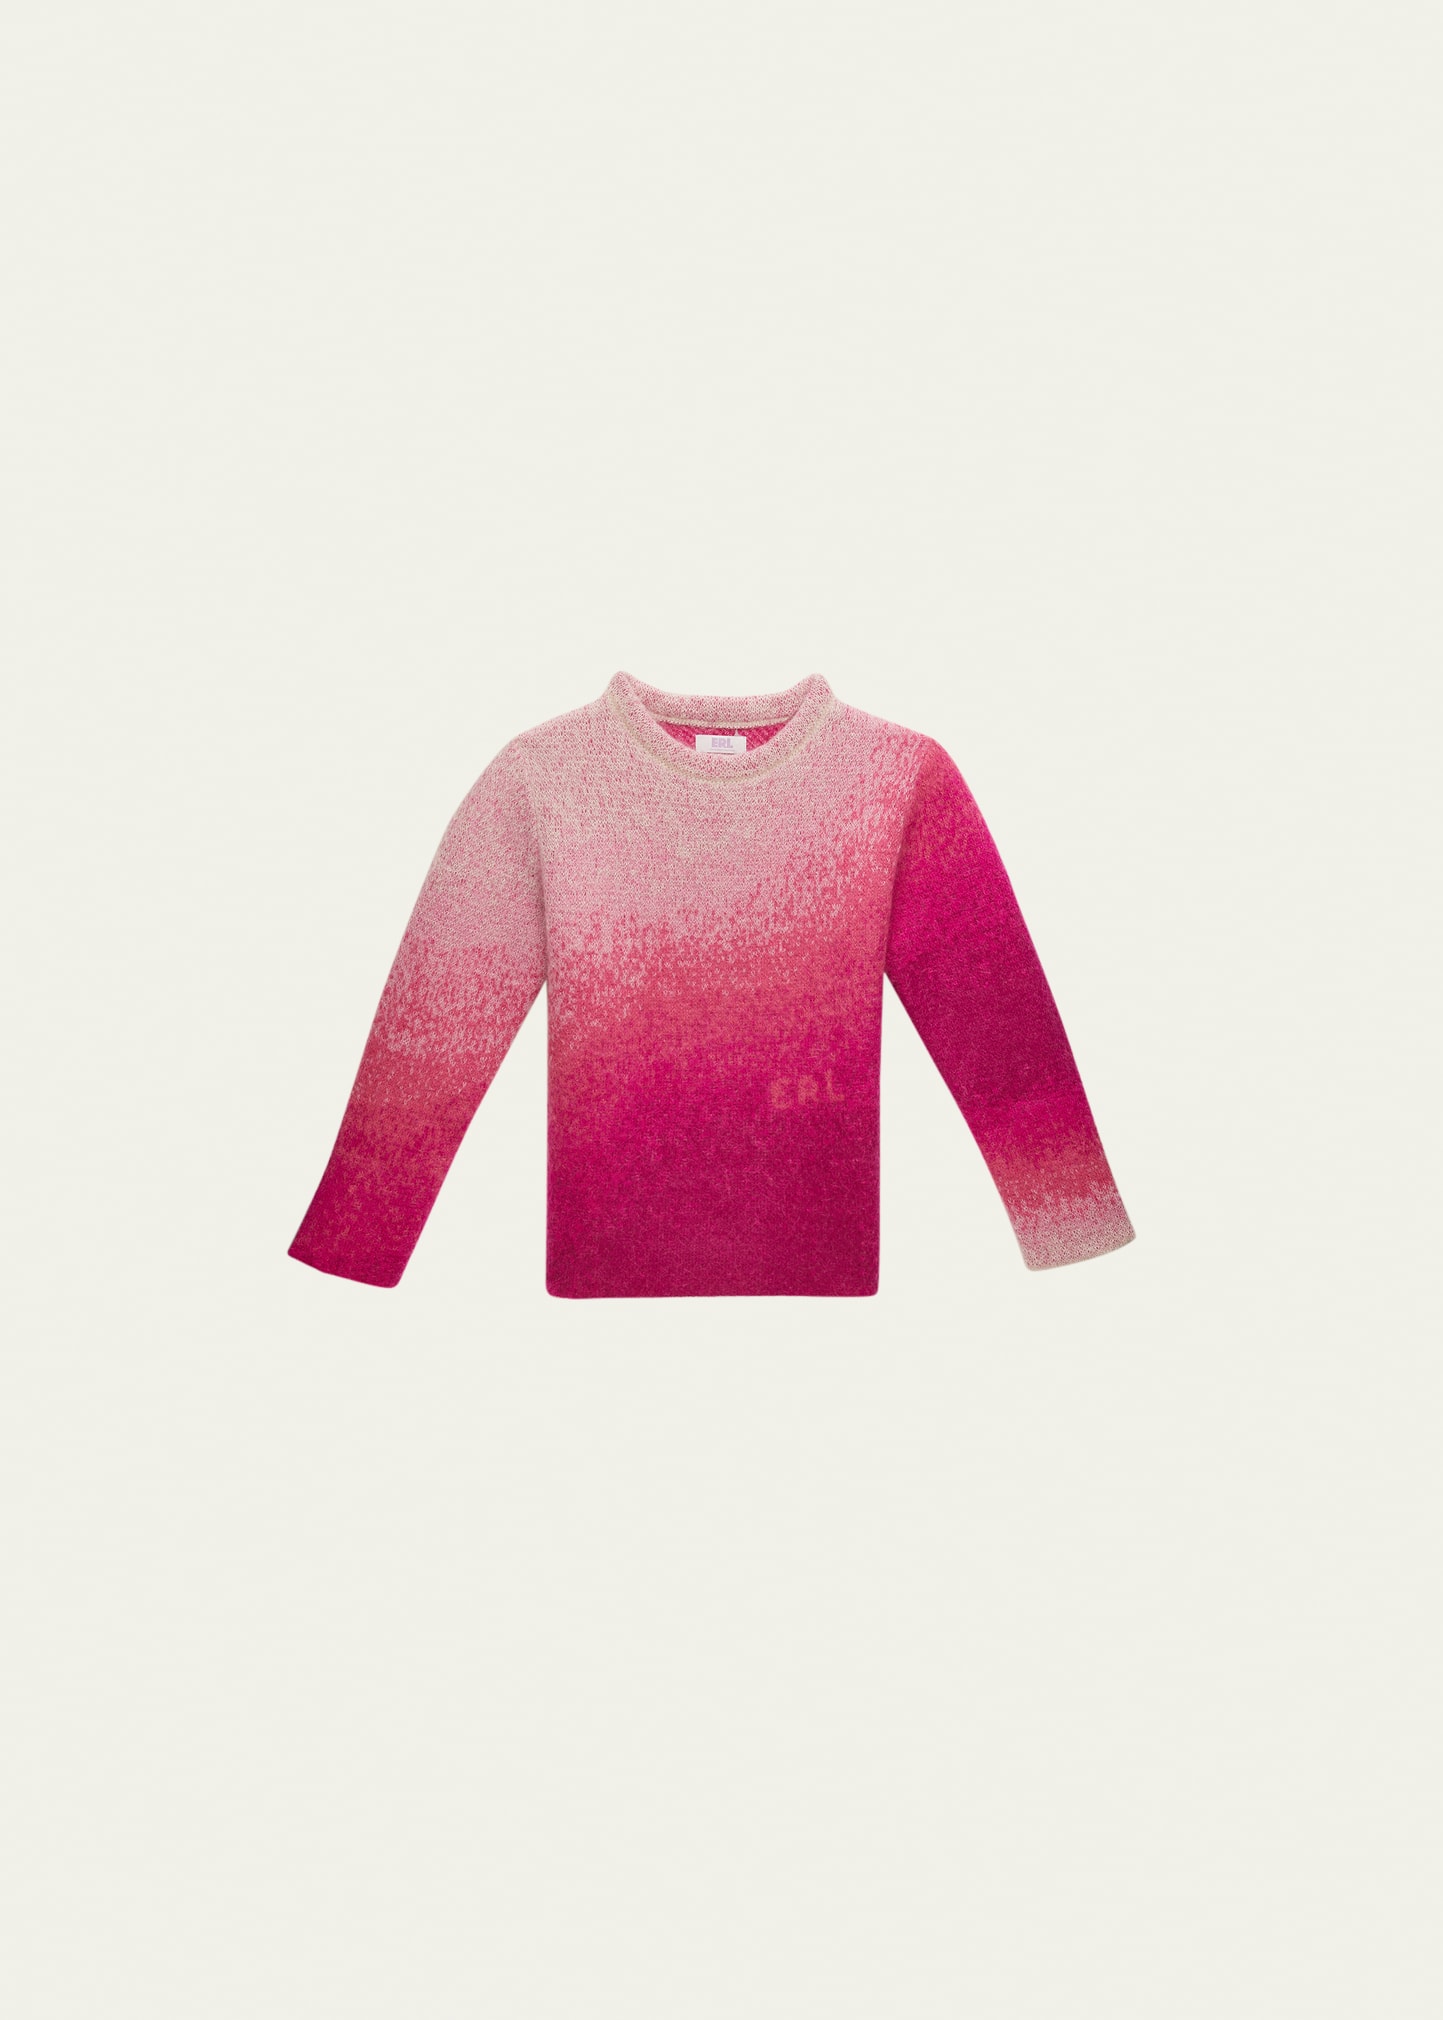 Erl Kid's Gradient Knit Crewneck Sweater In Pink